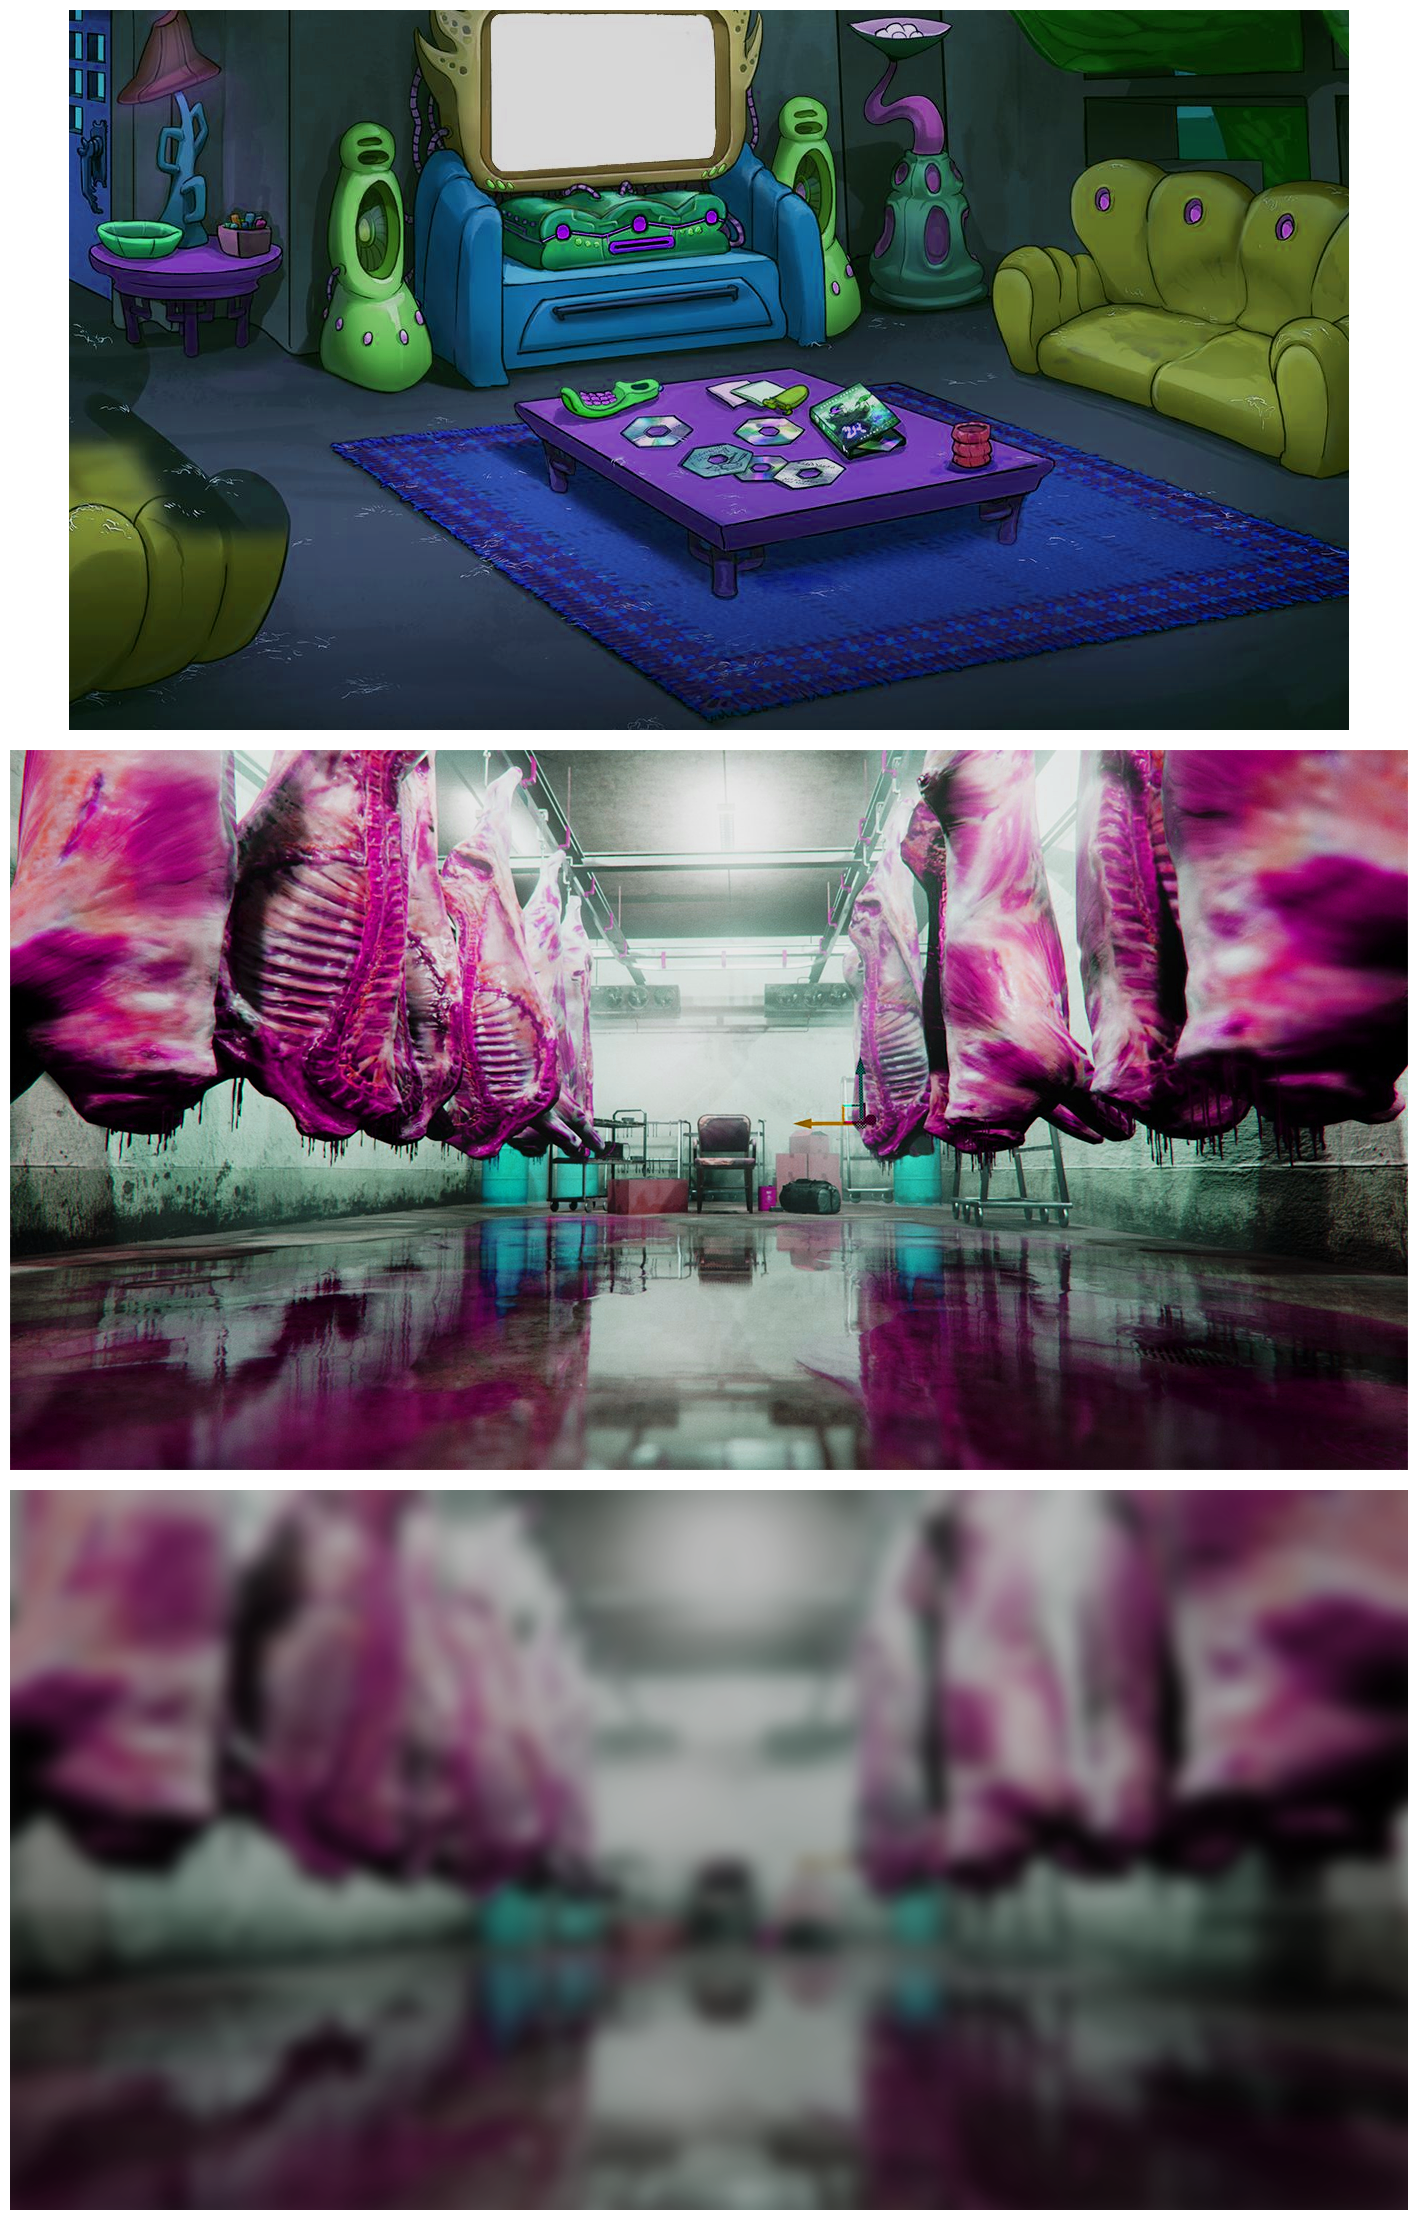 Backgrounds (Scrapped)